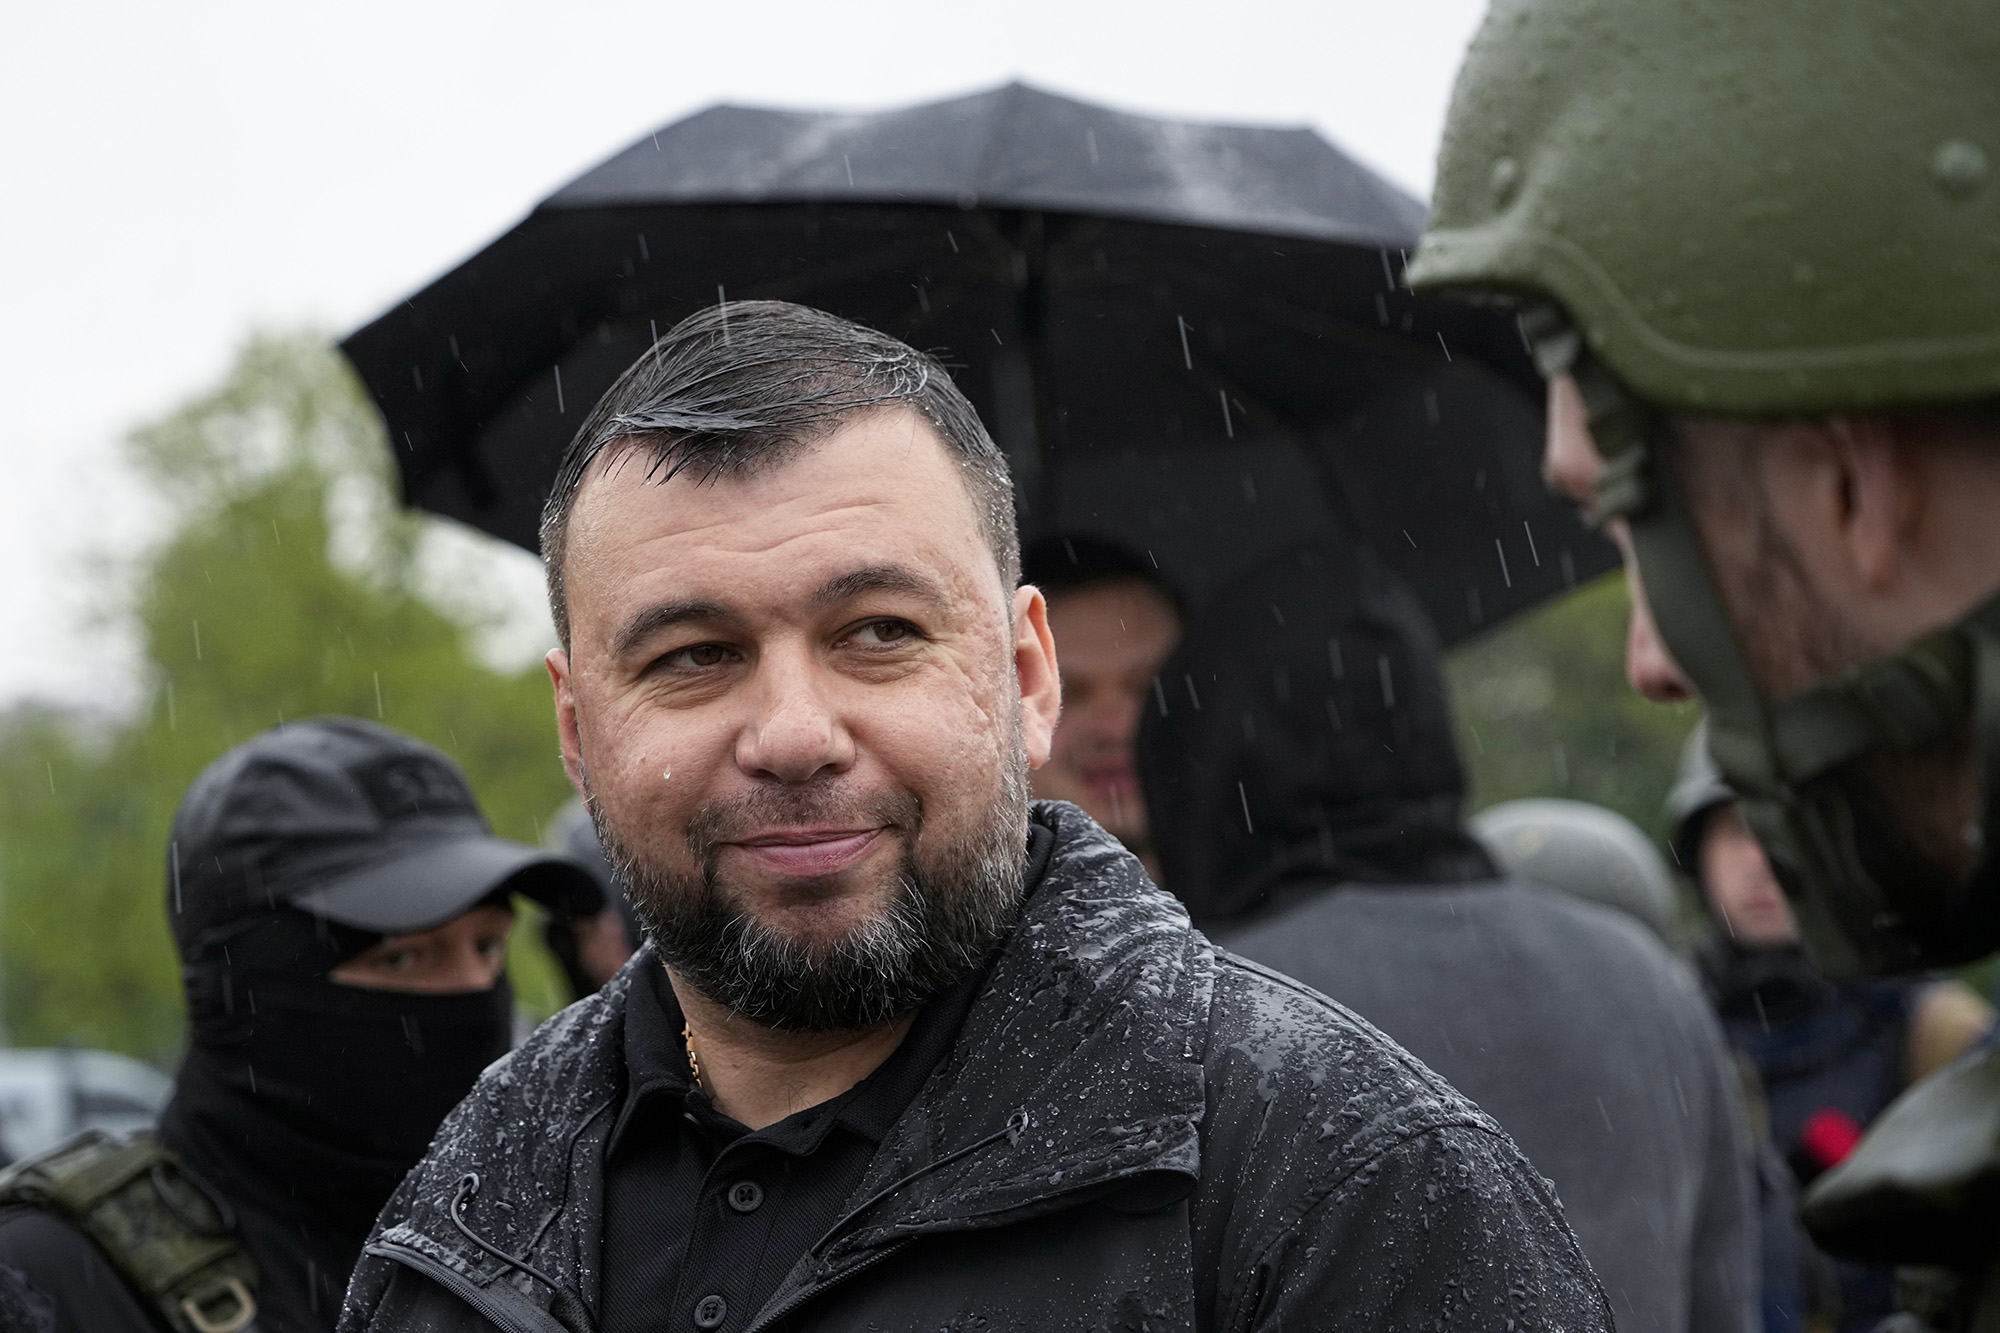 Denis Pushilin, the leader of the Donetsk People's Republic, speaks to journalists in Mariupol, Ukraine, on May 18. This photo was taken during a trip organized by the Russian Ministry of Defense.